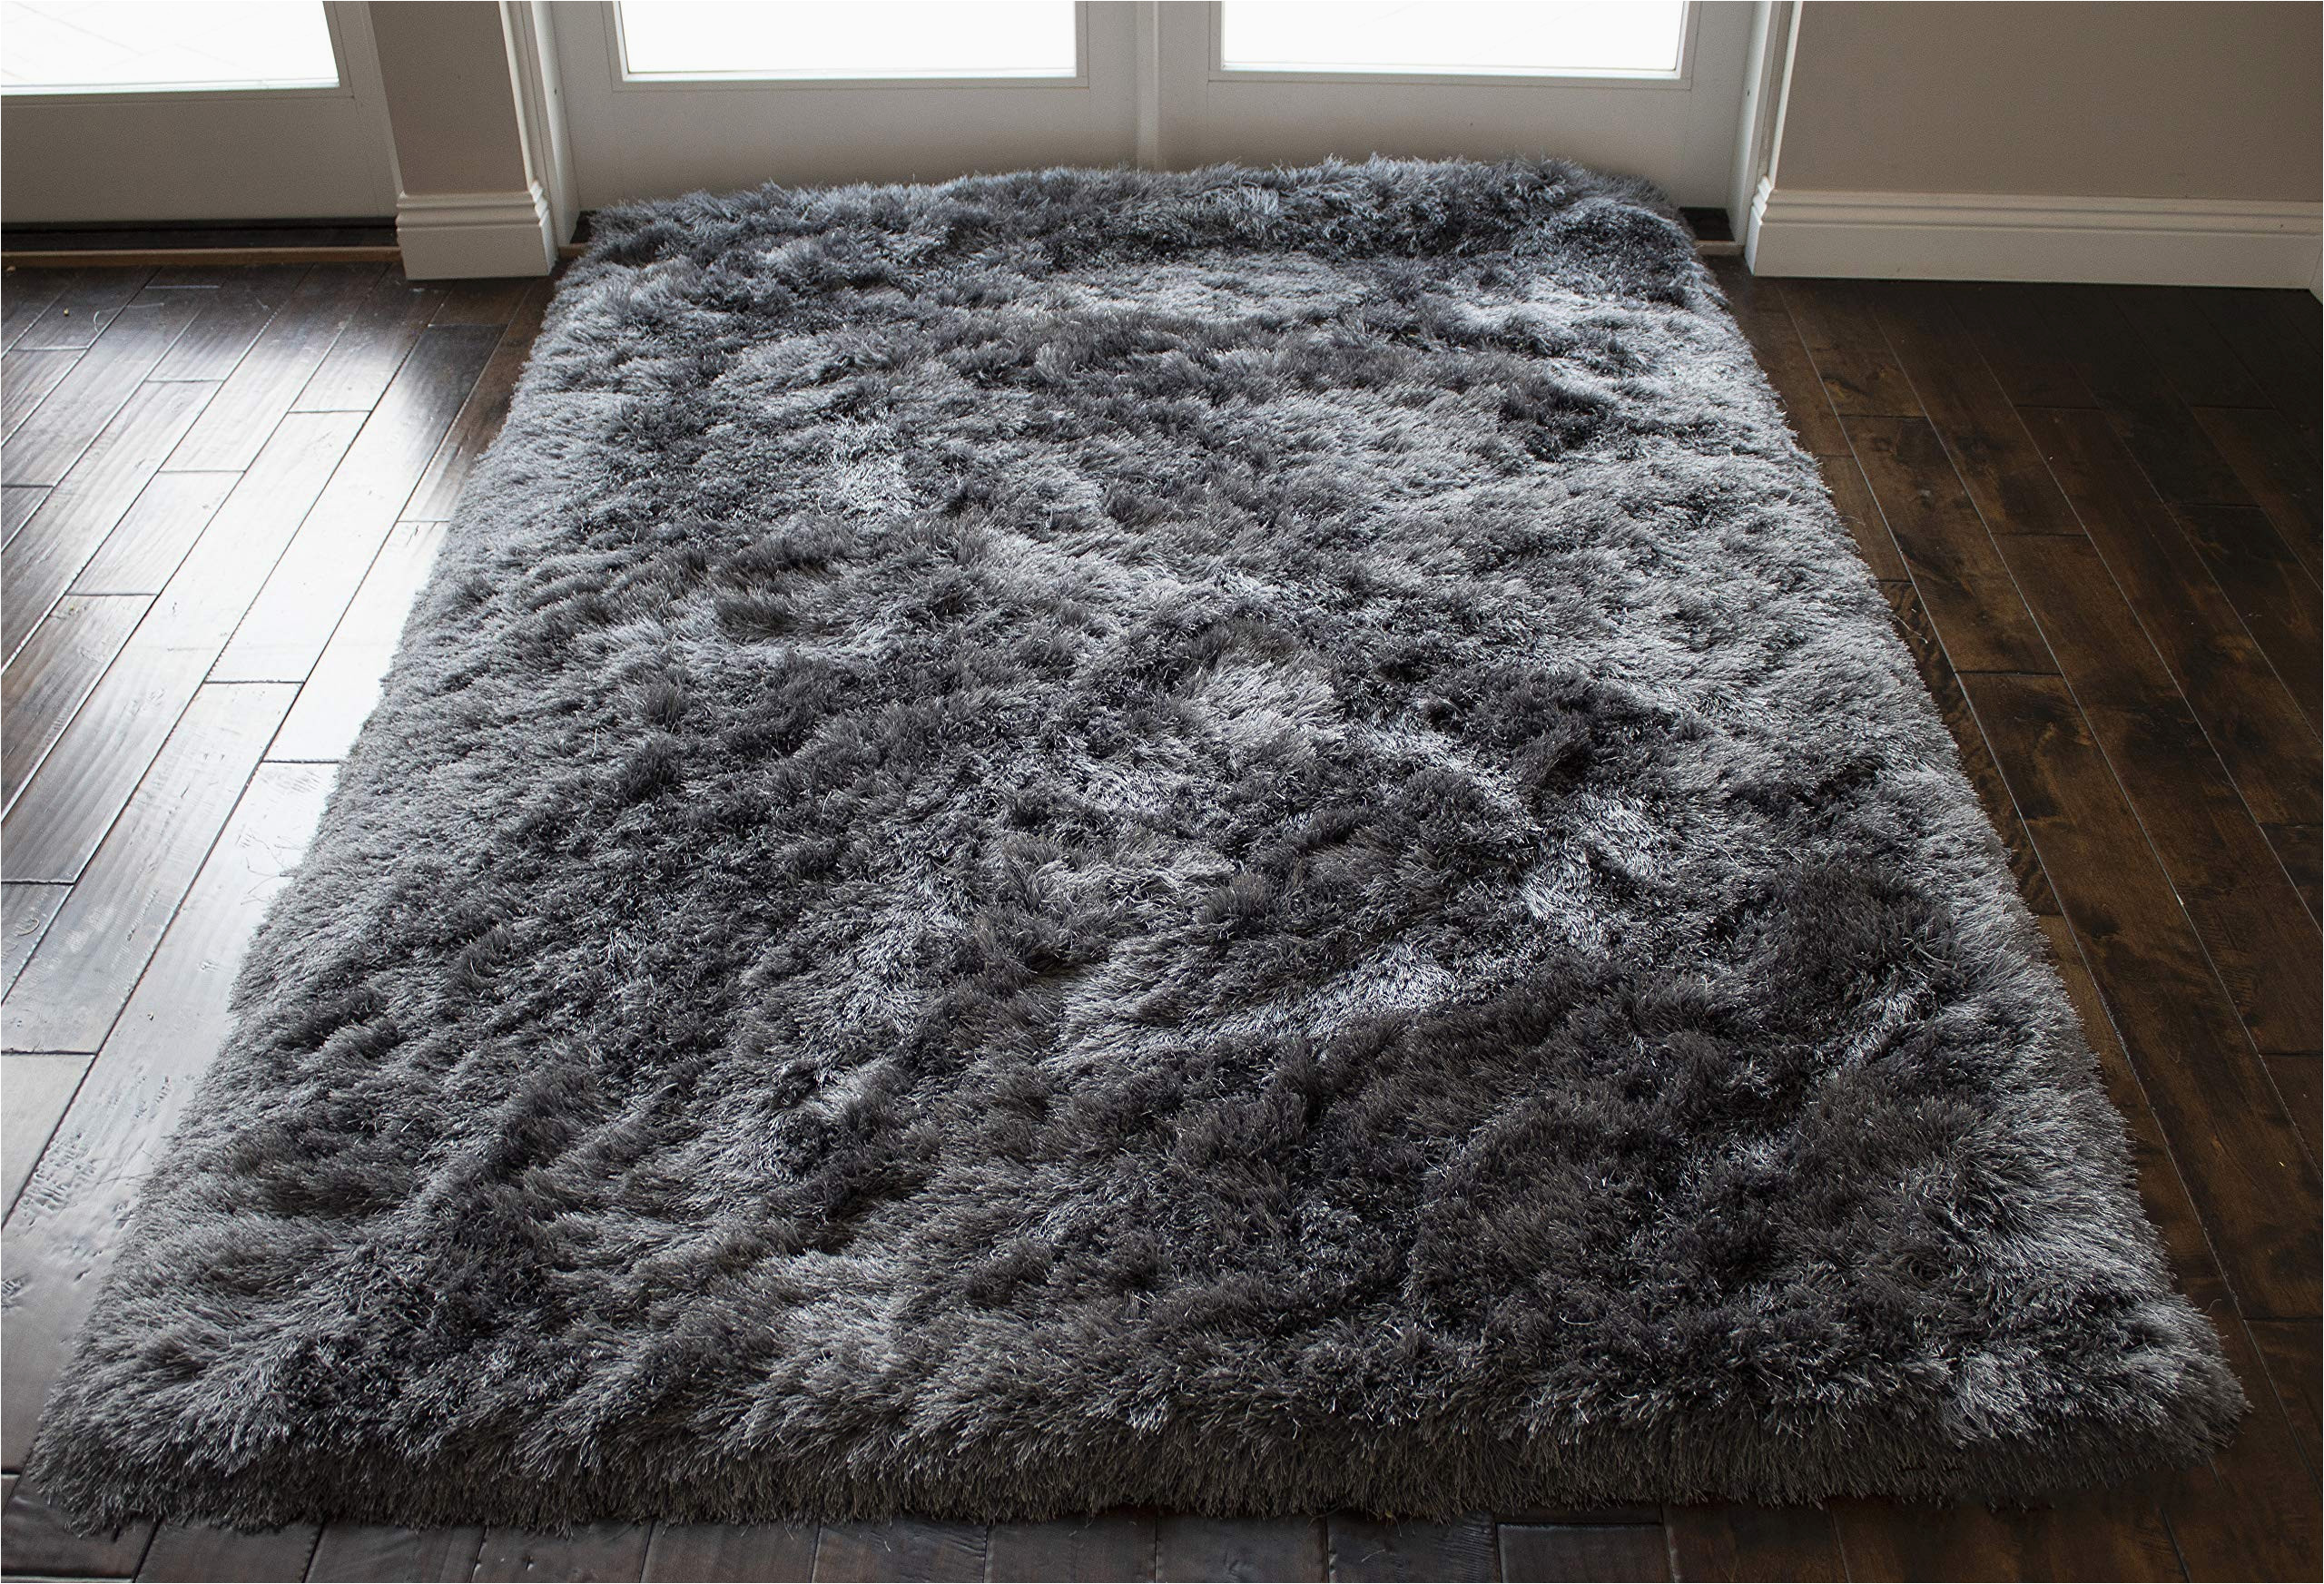 8×10 solid Gray area Rug Gray Grey Color Two tone 8×10 area Rug Carpet Rug solid soft Plush Pile Shag Shaggy Fuzzy Furry Modern Contemporary Decorative Designer Bedroom Living …